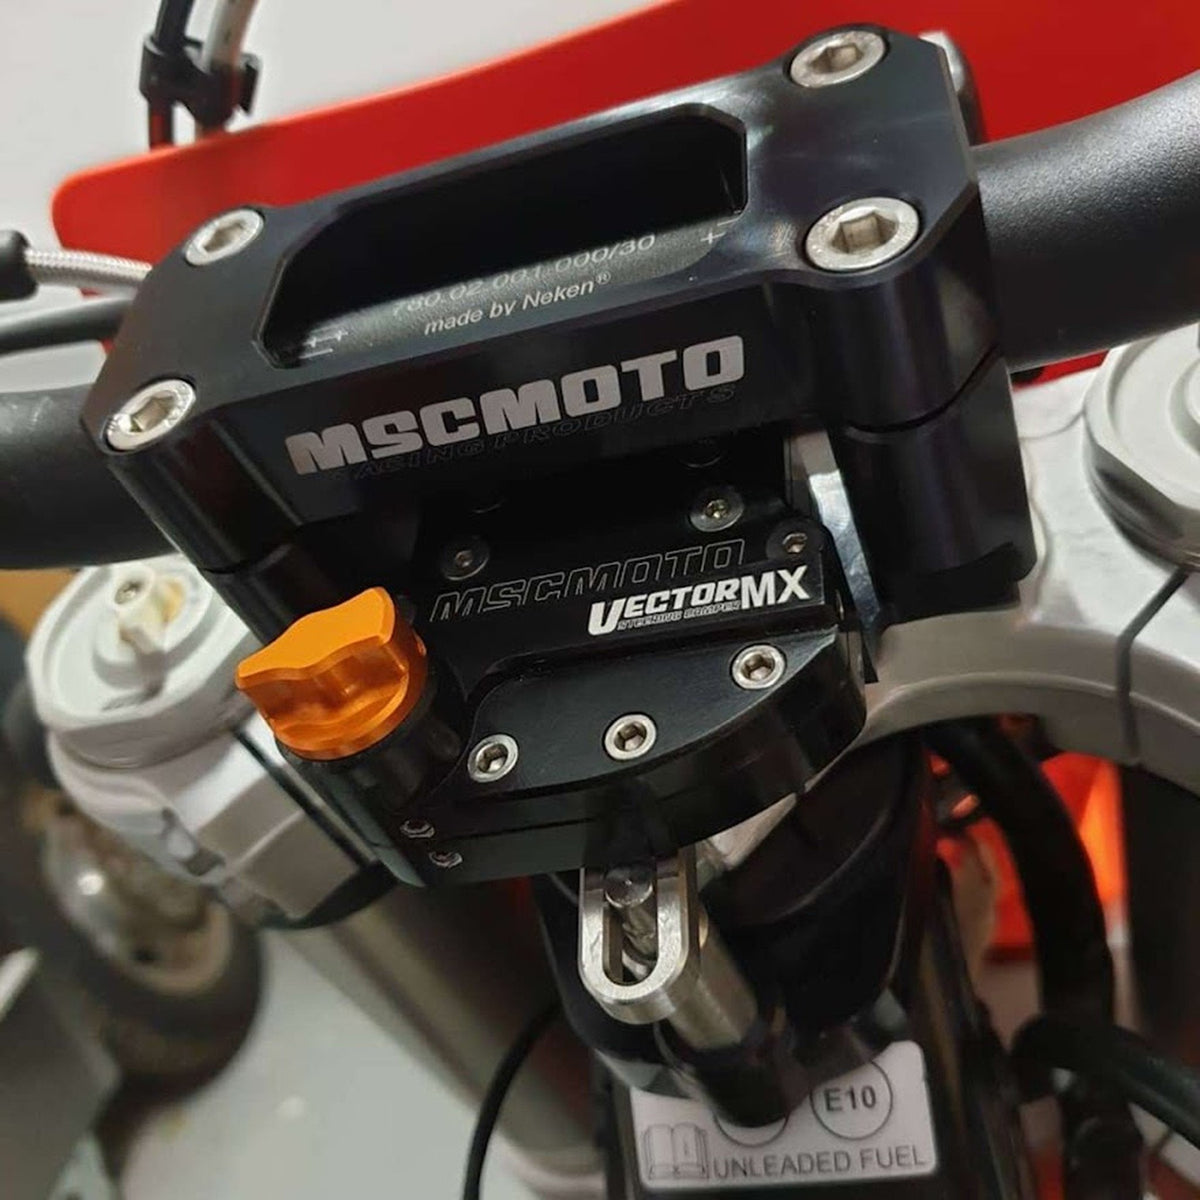 VectorMX Steering Damper Kit &quot;Down Under&quot; Mount (VEC0013) - KTM 65 SX, HUSQVARNA TC 65, VEC0013, Husqvarna MSC Moto, KTM MSC Moto, vectormx, Steering Dampers - Imported and distributed in North &amp; South America by Lindeco Genuine Powersports - Premier Powersports Equipment and Accessories for Motorcycle Enthusiasts, Professional Riders and Dealers.